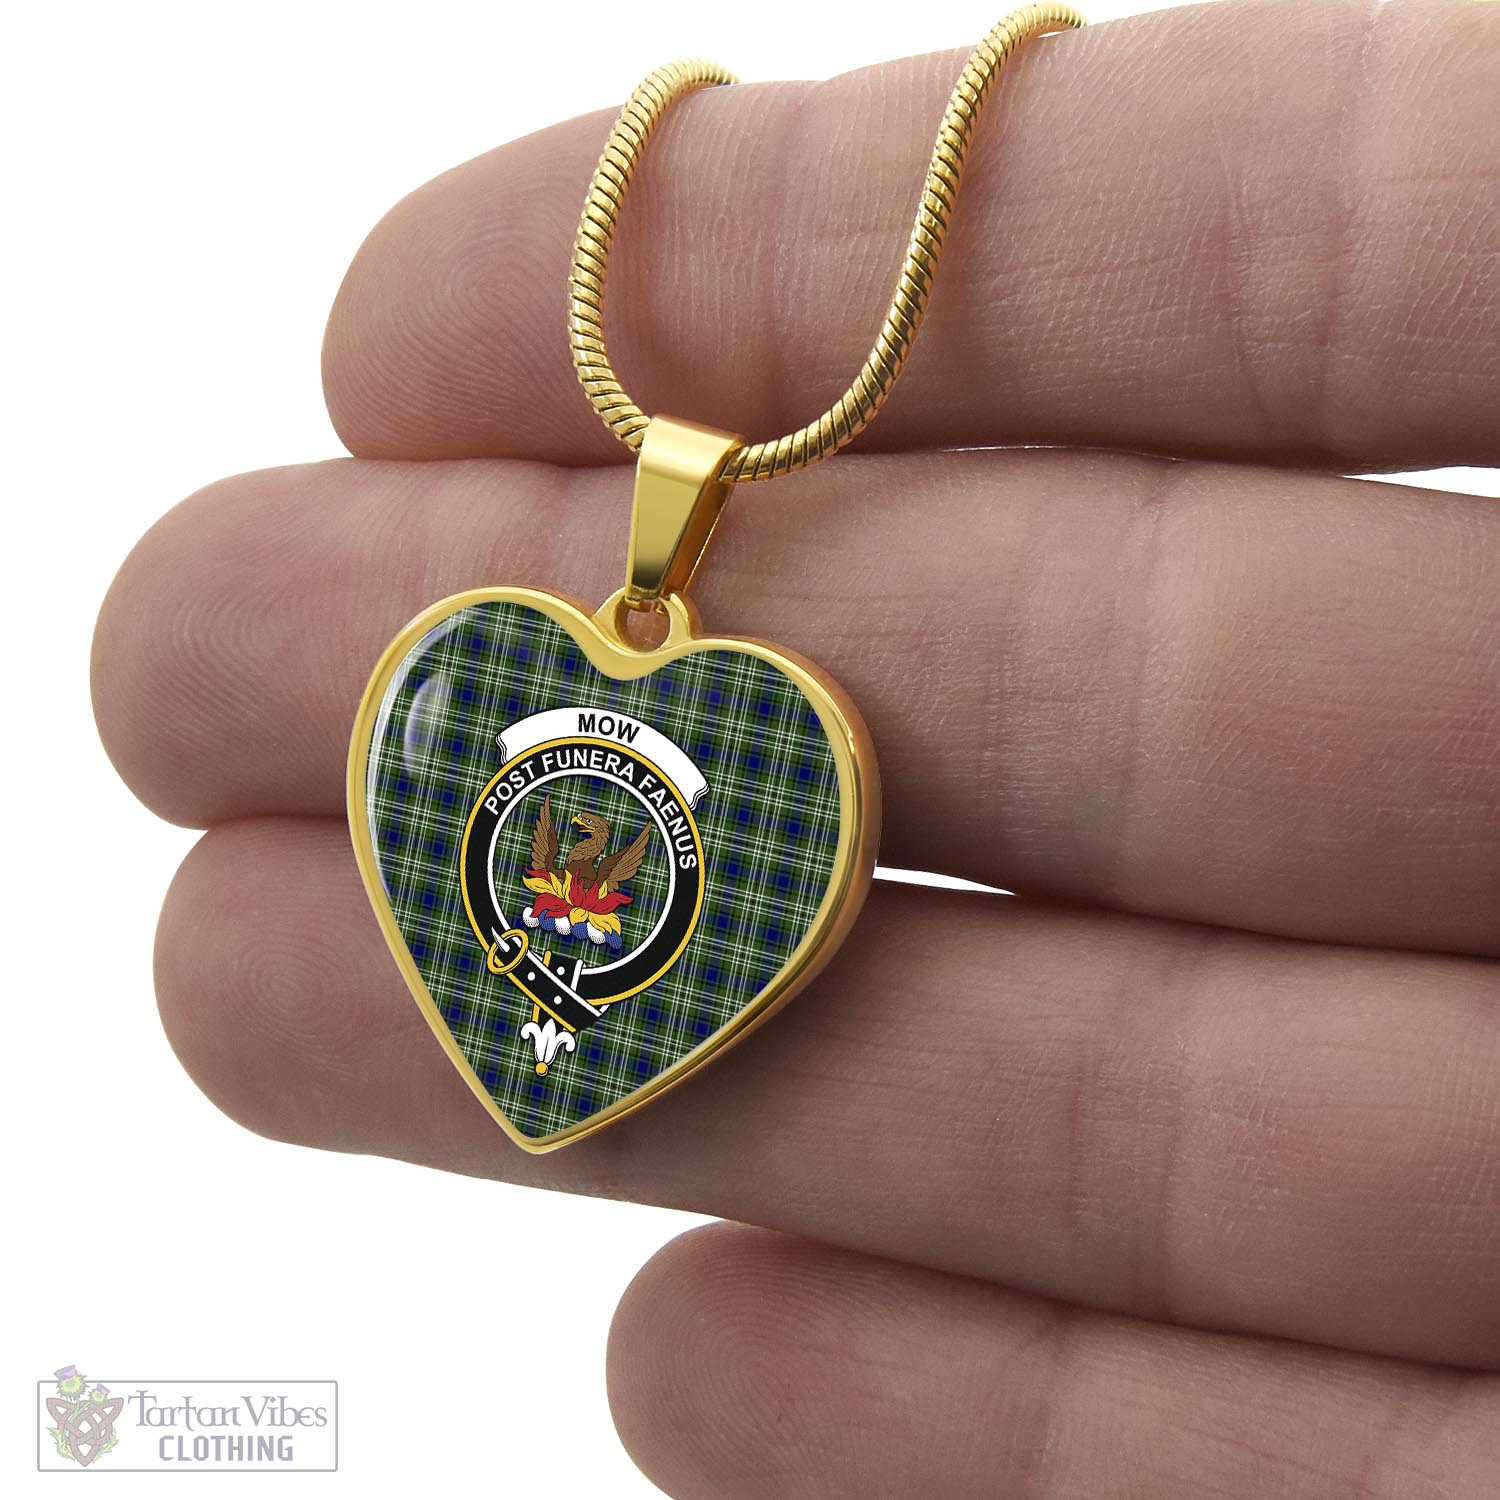 Tartan Vibes Clothing Mow Tartan Heart Necklace with Family Crest